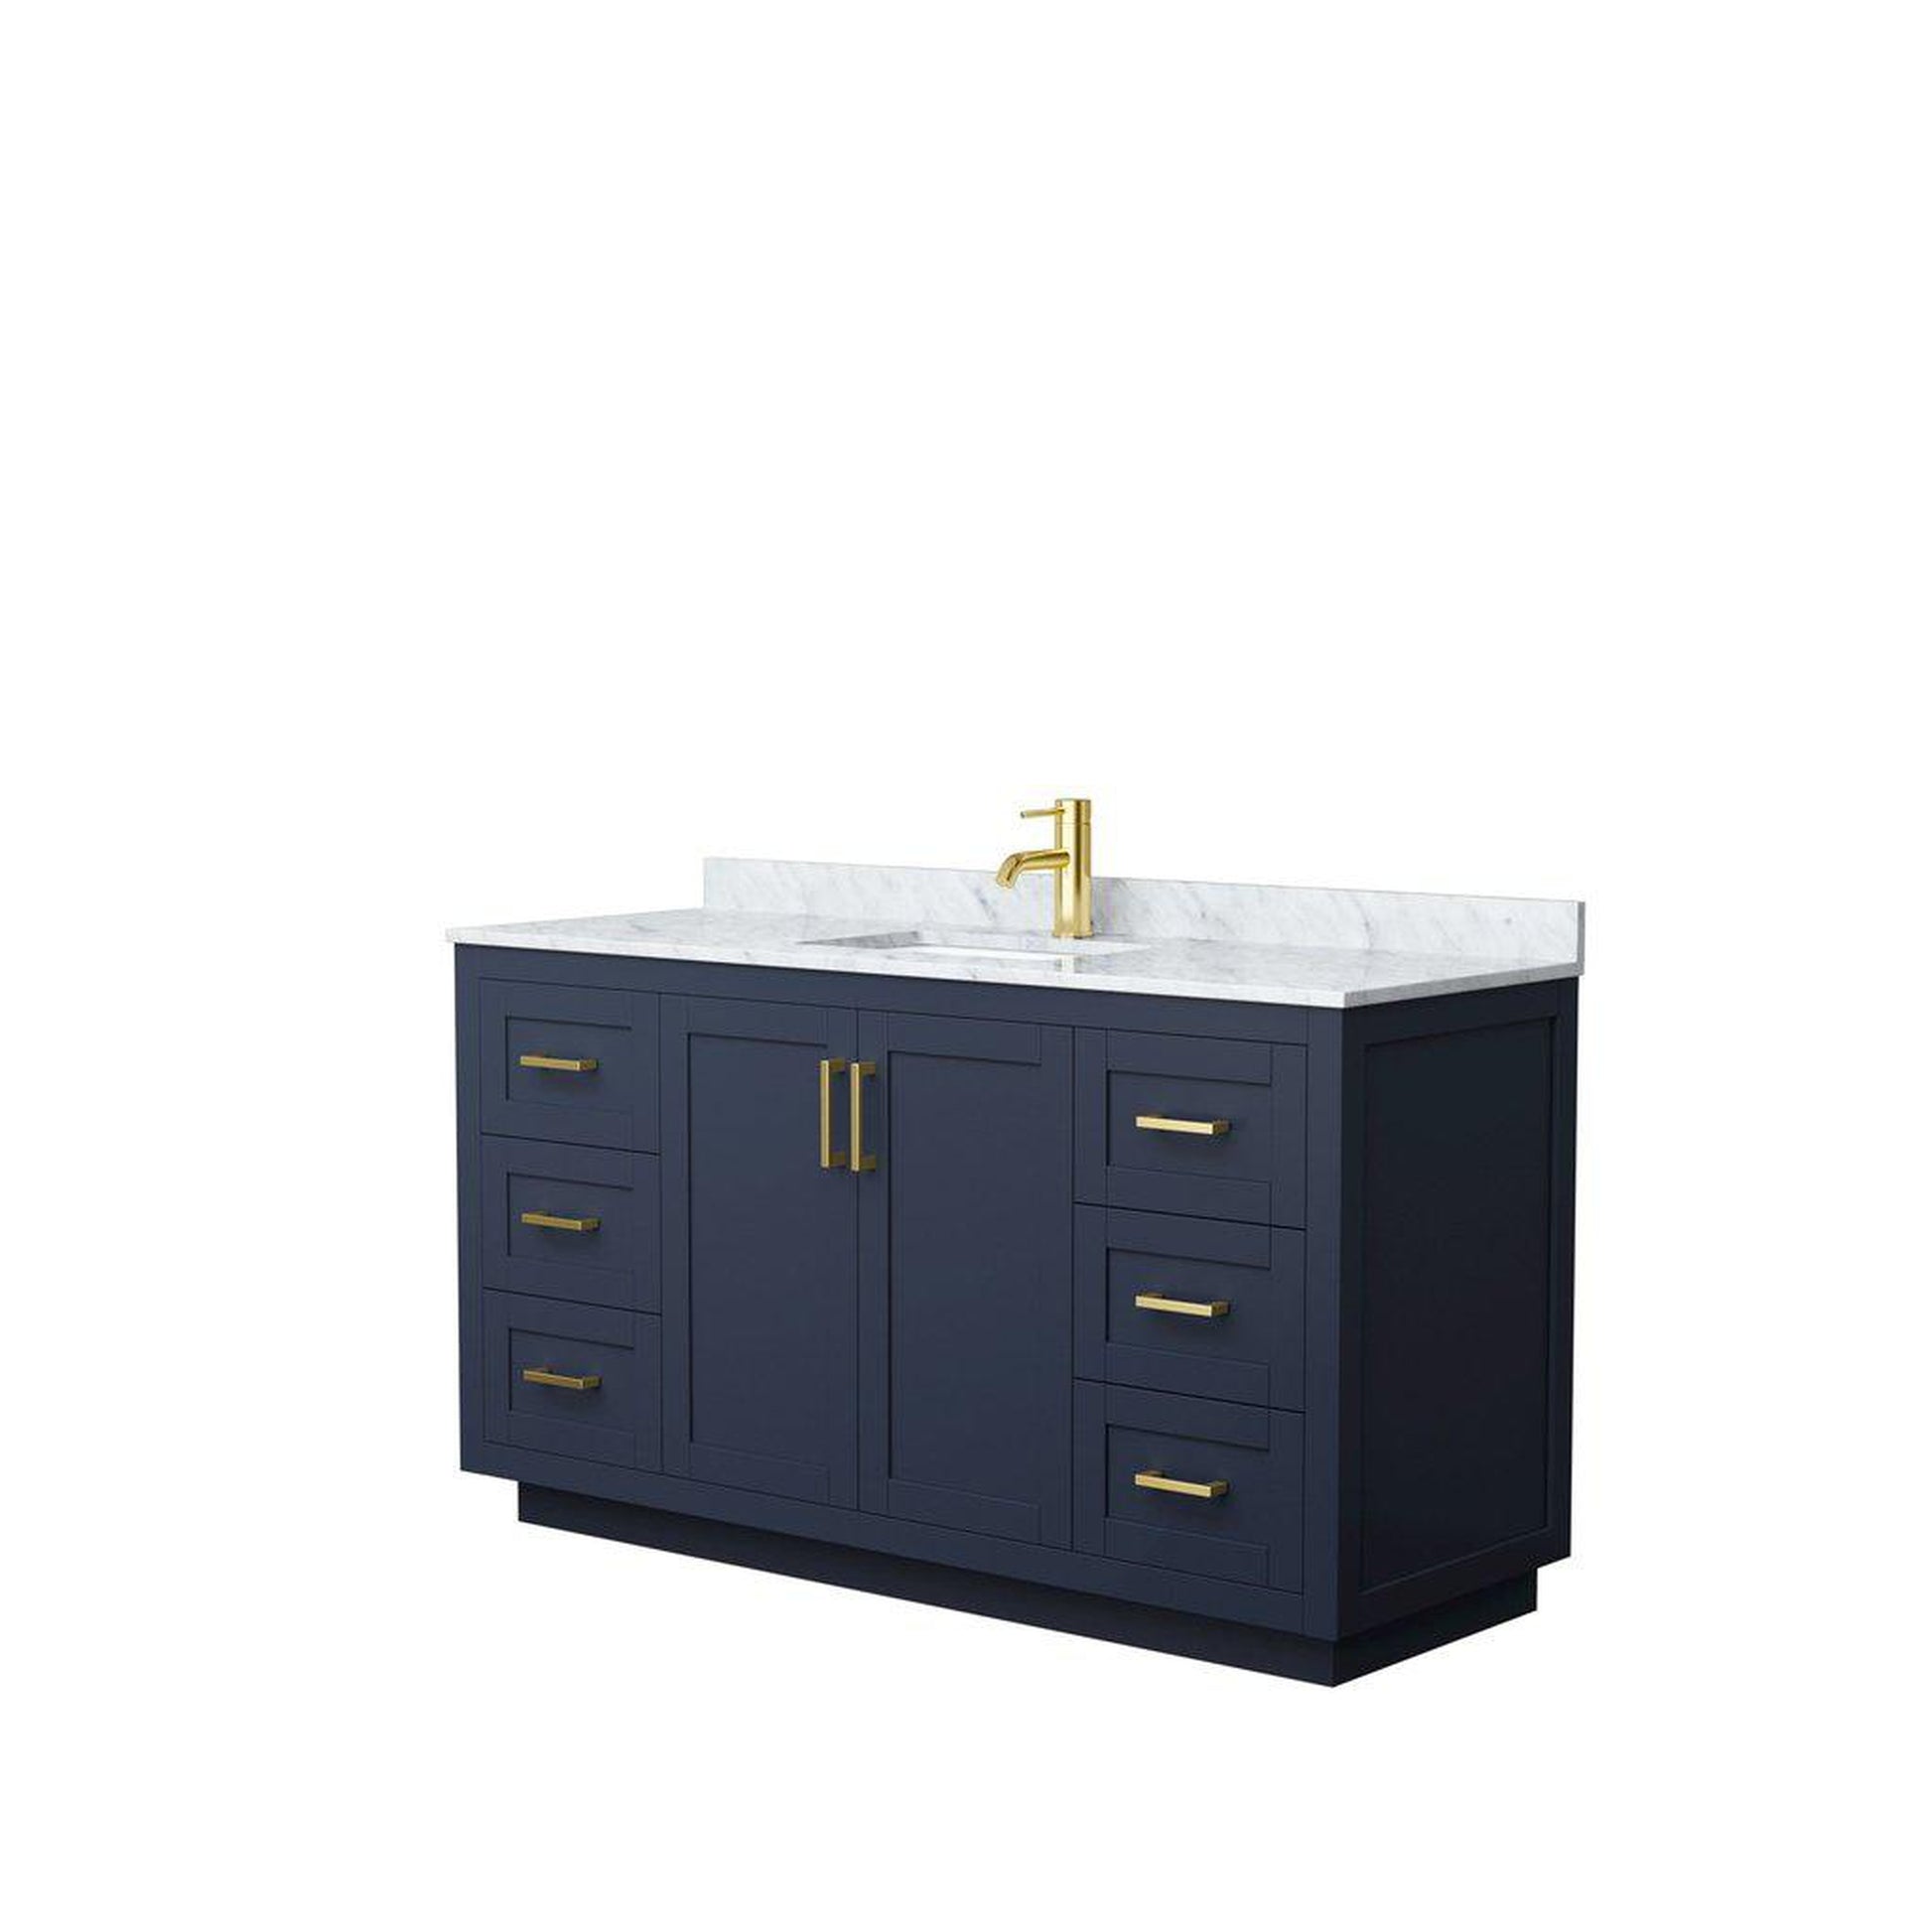 Wyndham Collection Miranda 60" Single Bathroom Dark Blue Vanity Set With White Carrara Marble Countertop, Undermount Square Sink, And Brushed Gold Trim